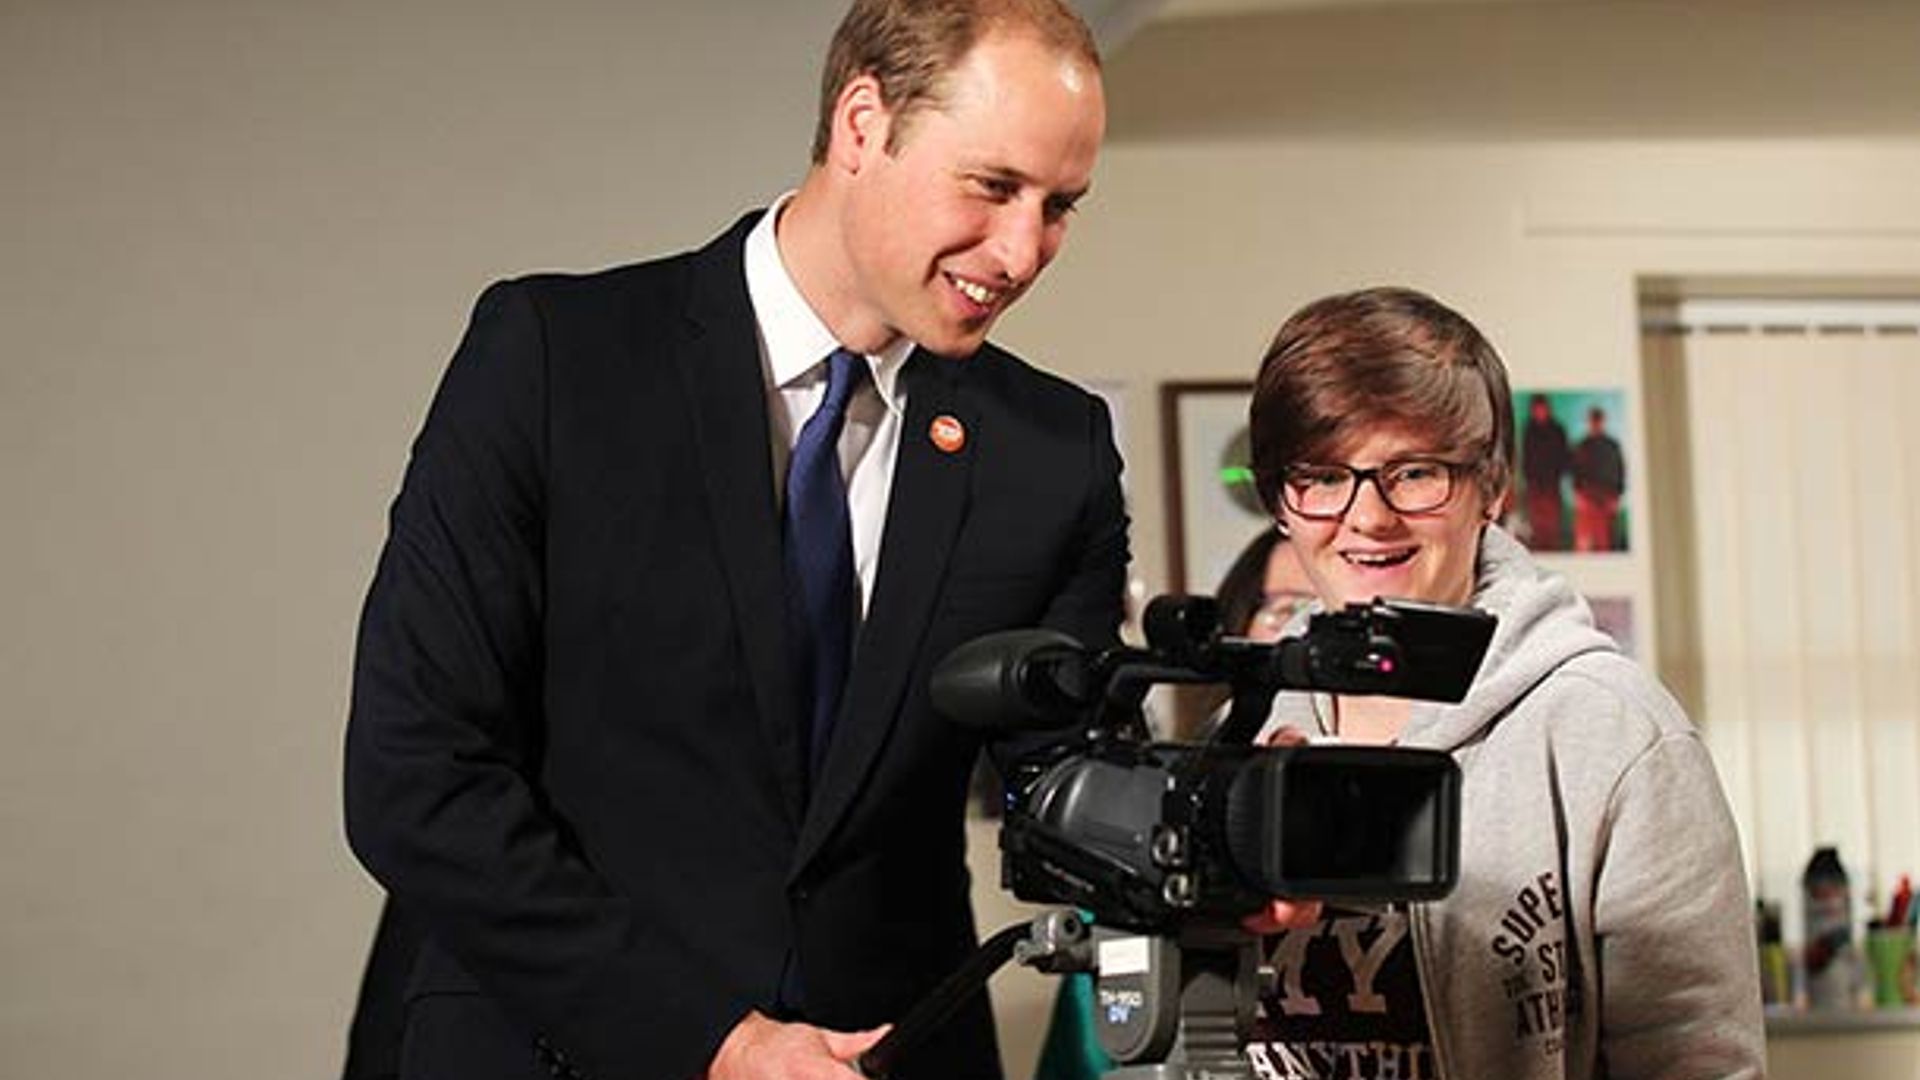 Prince William joins schoolboy for 'cheeky' selfie